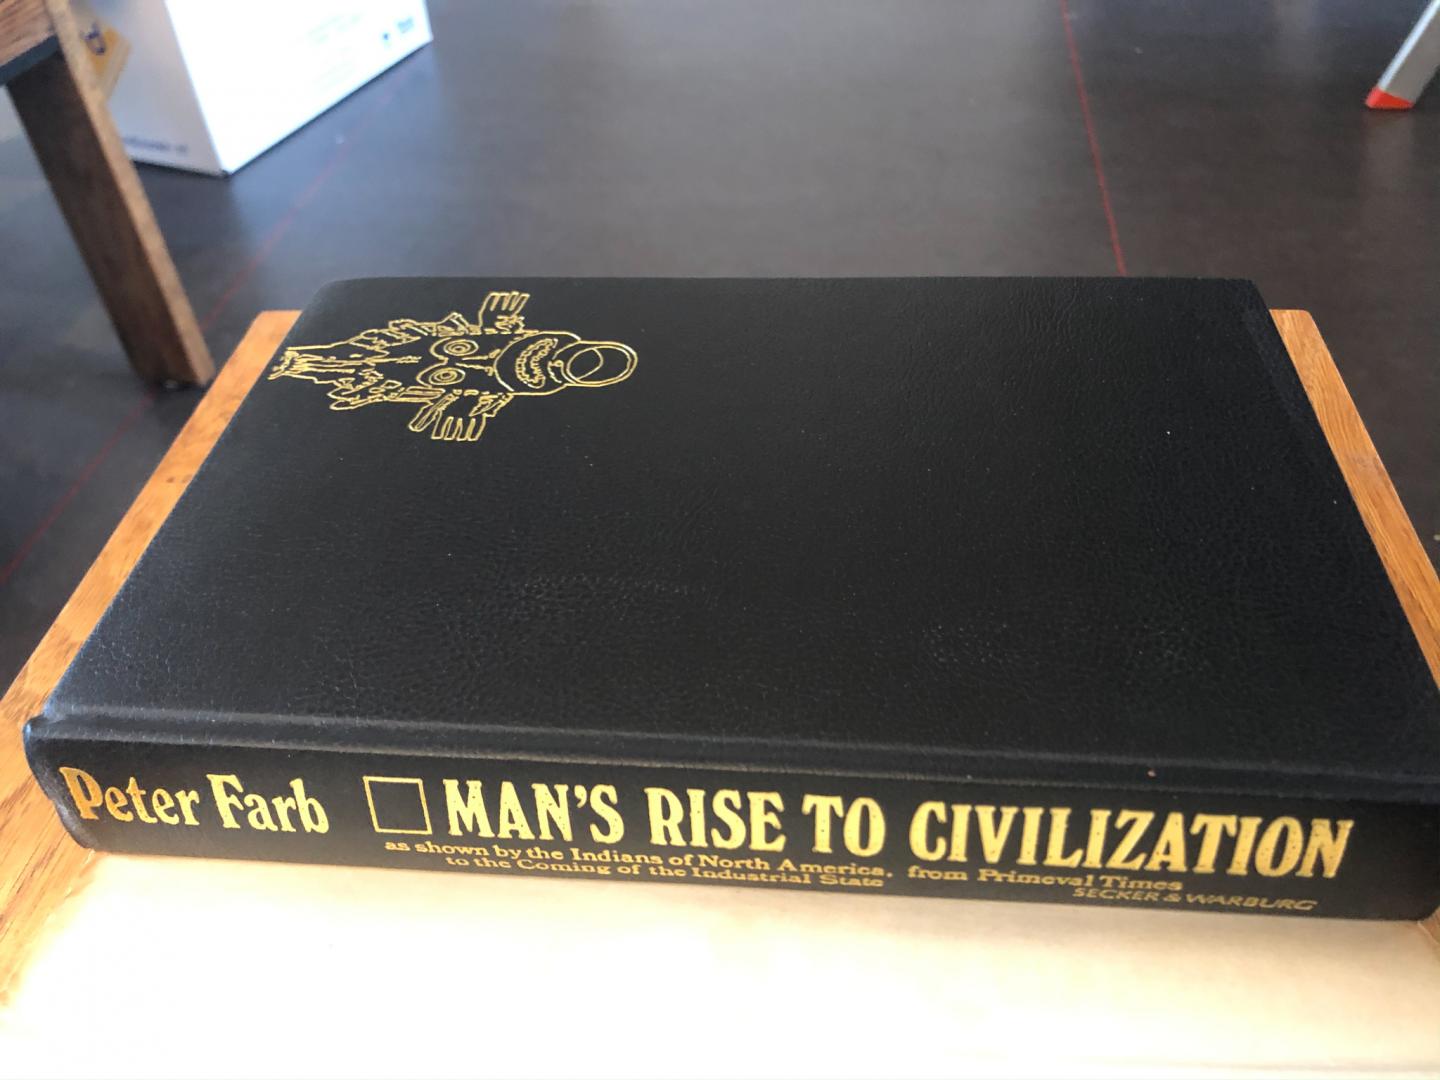 Farb, Peter - Man's rise to civilization